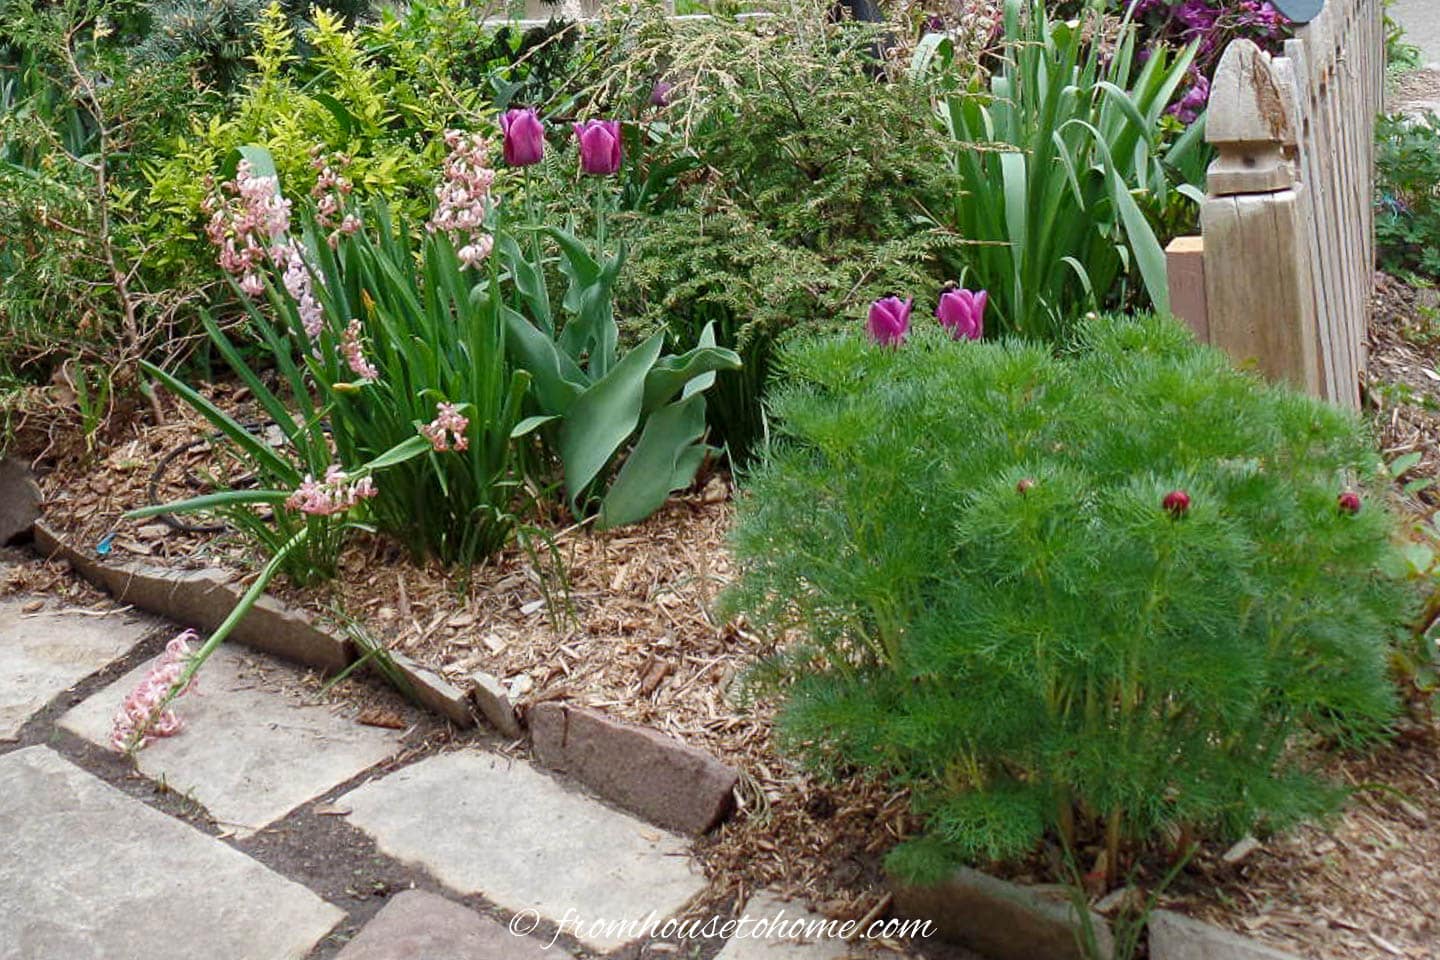 flagstone path with flagstone edging beside a garden bed